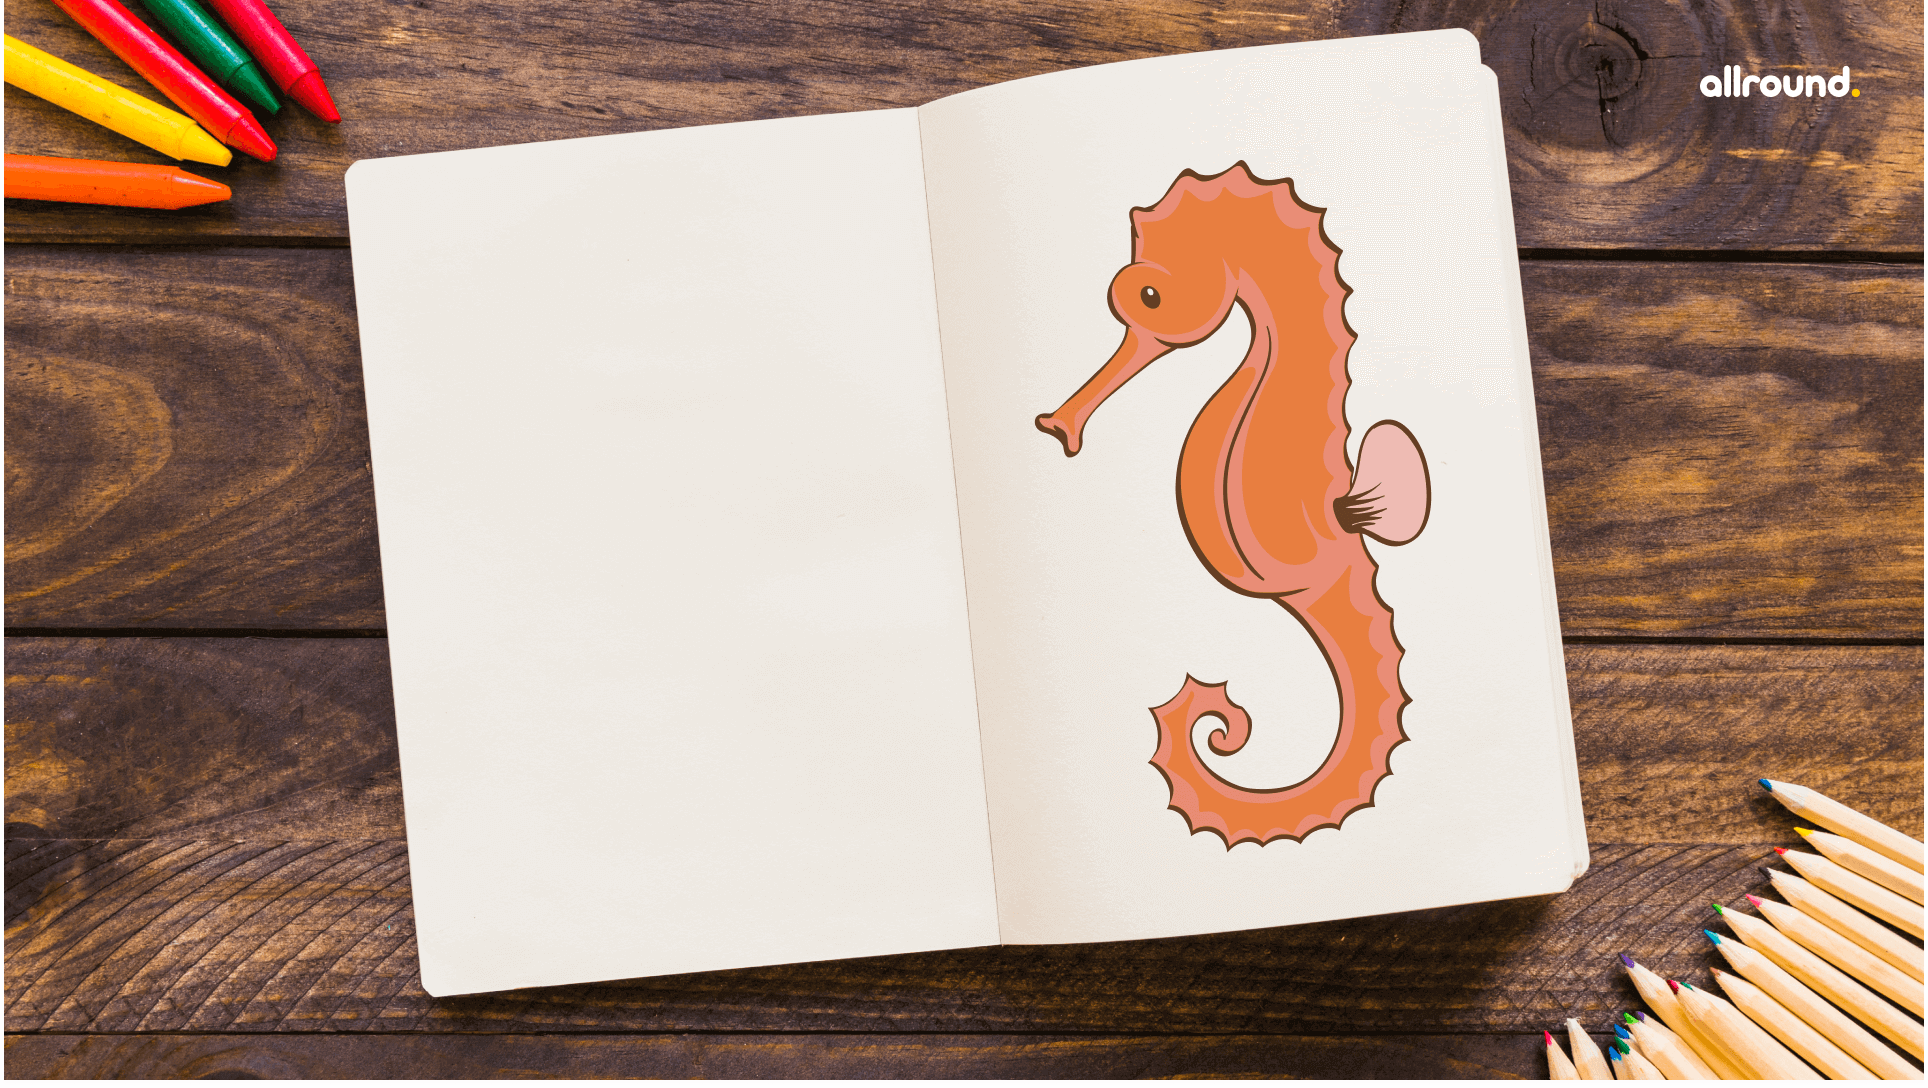 how to draw a seahorse